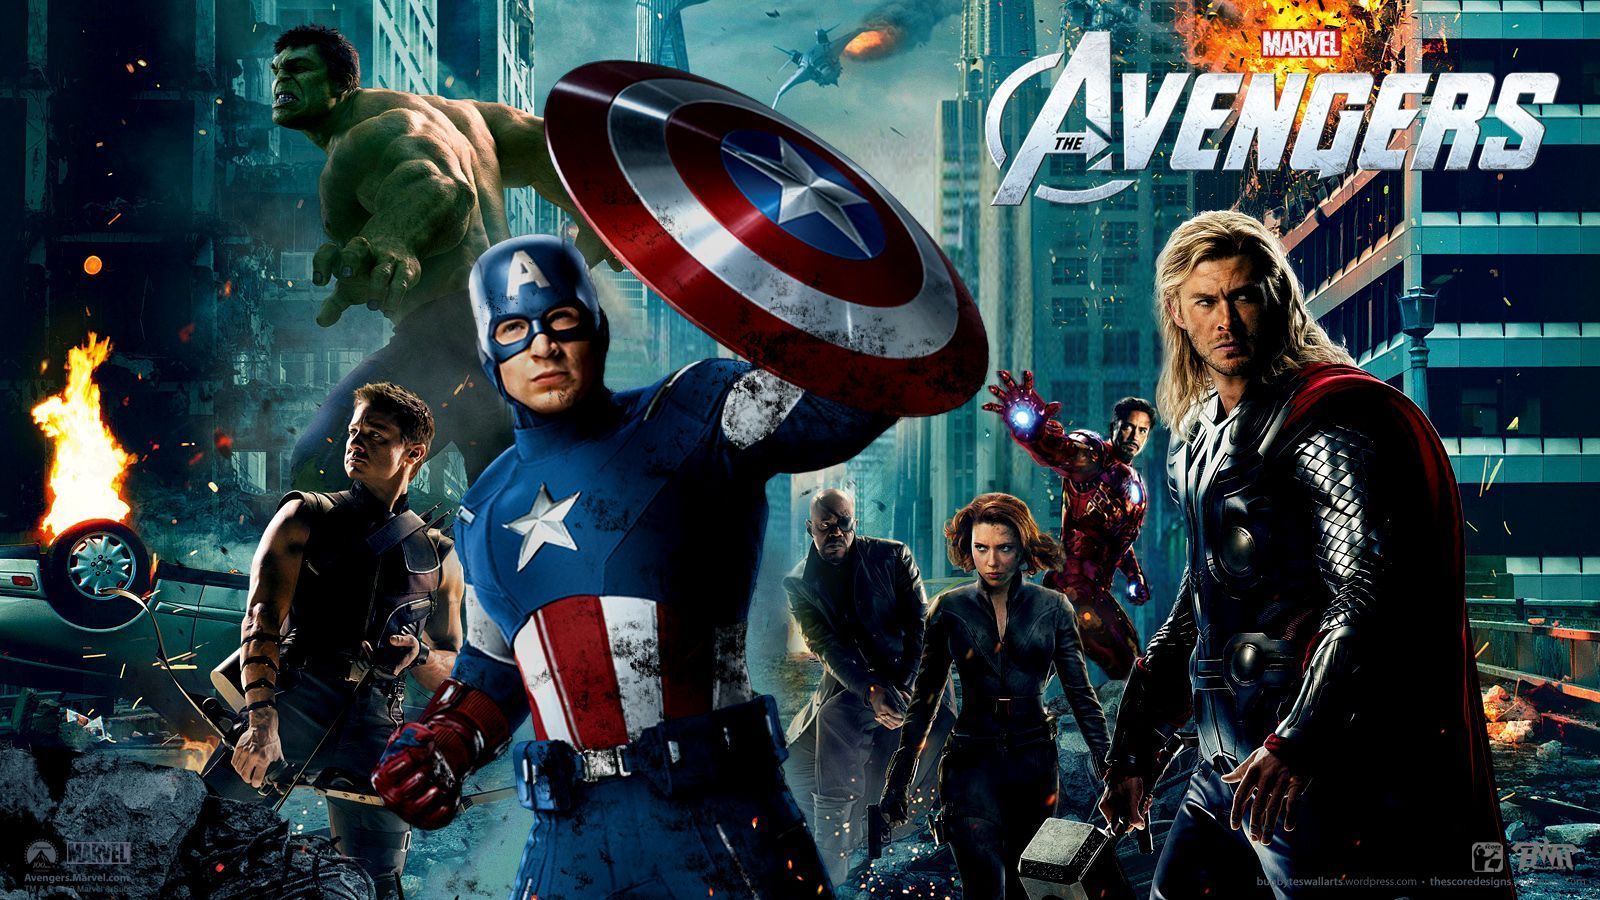 Avengers Hollywood Best Movie HD Wallpapers 2015 - All HD Backgrounds